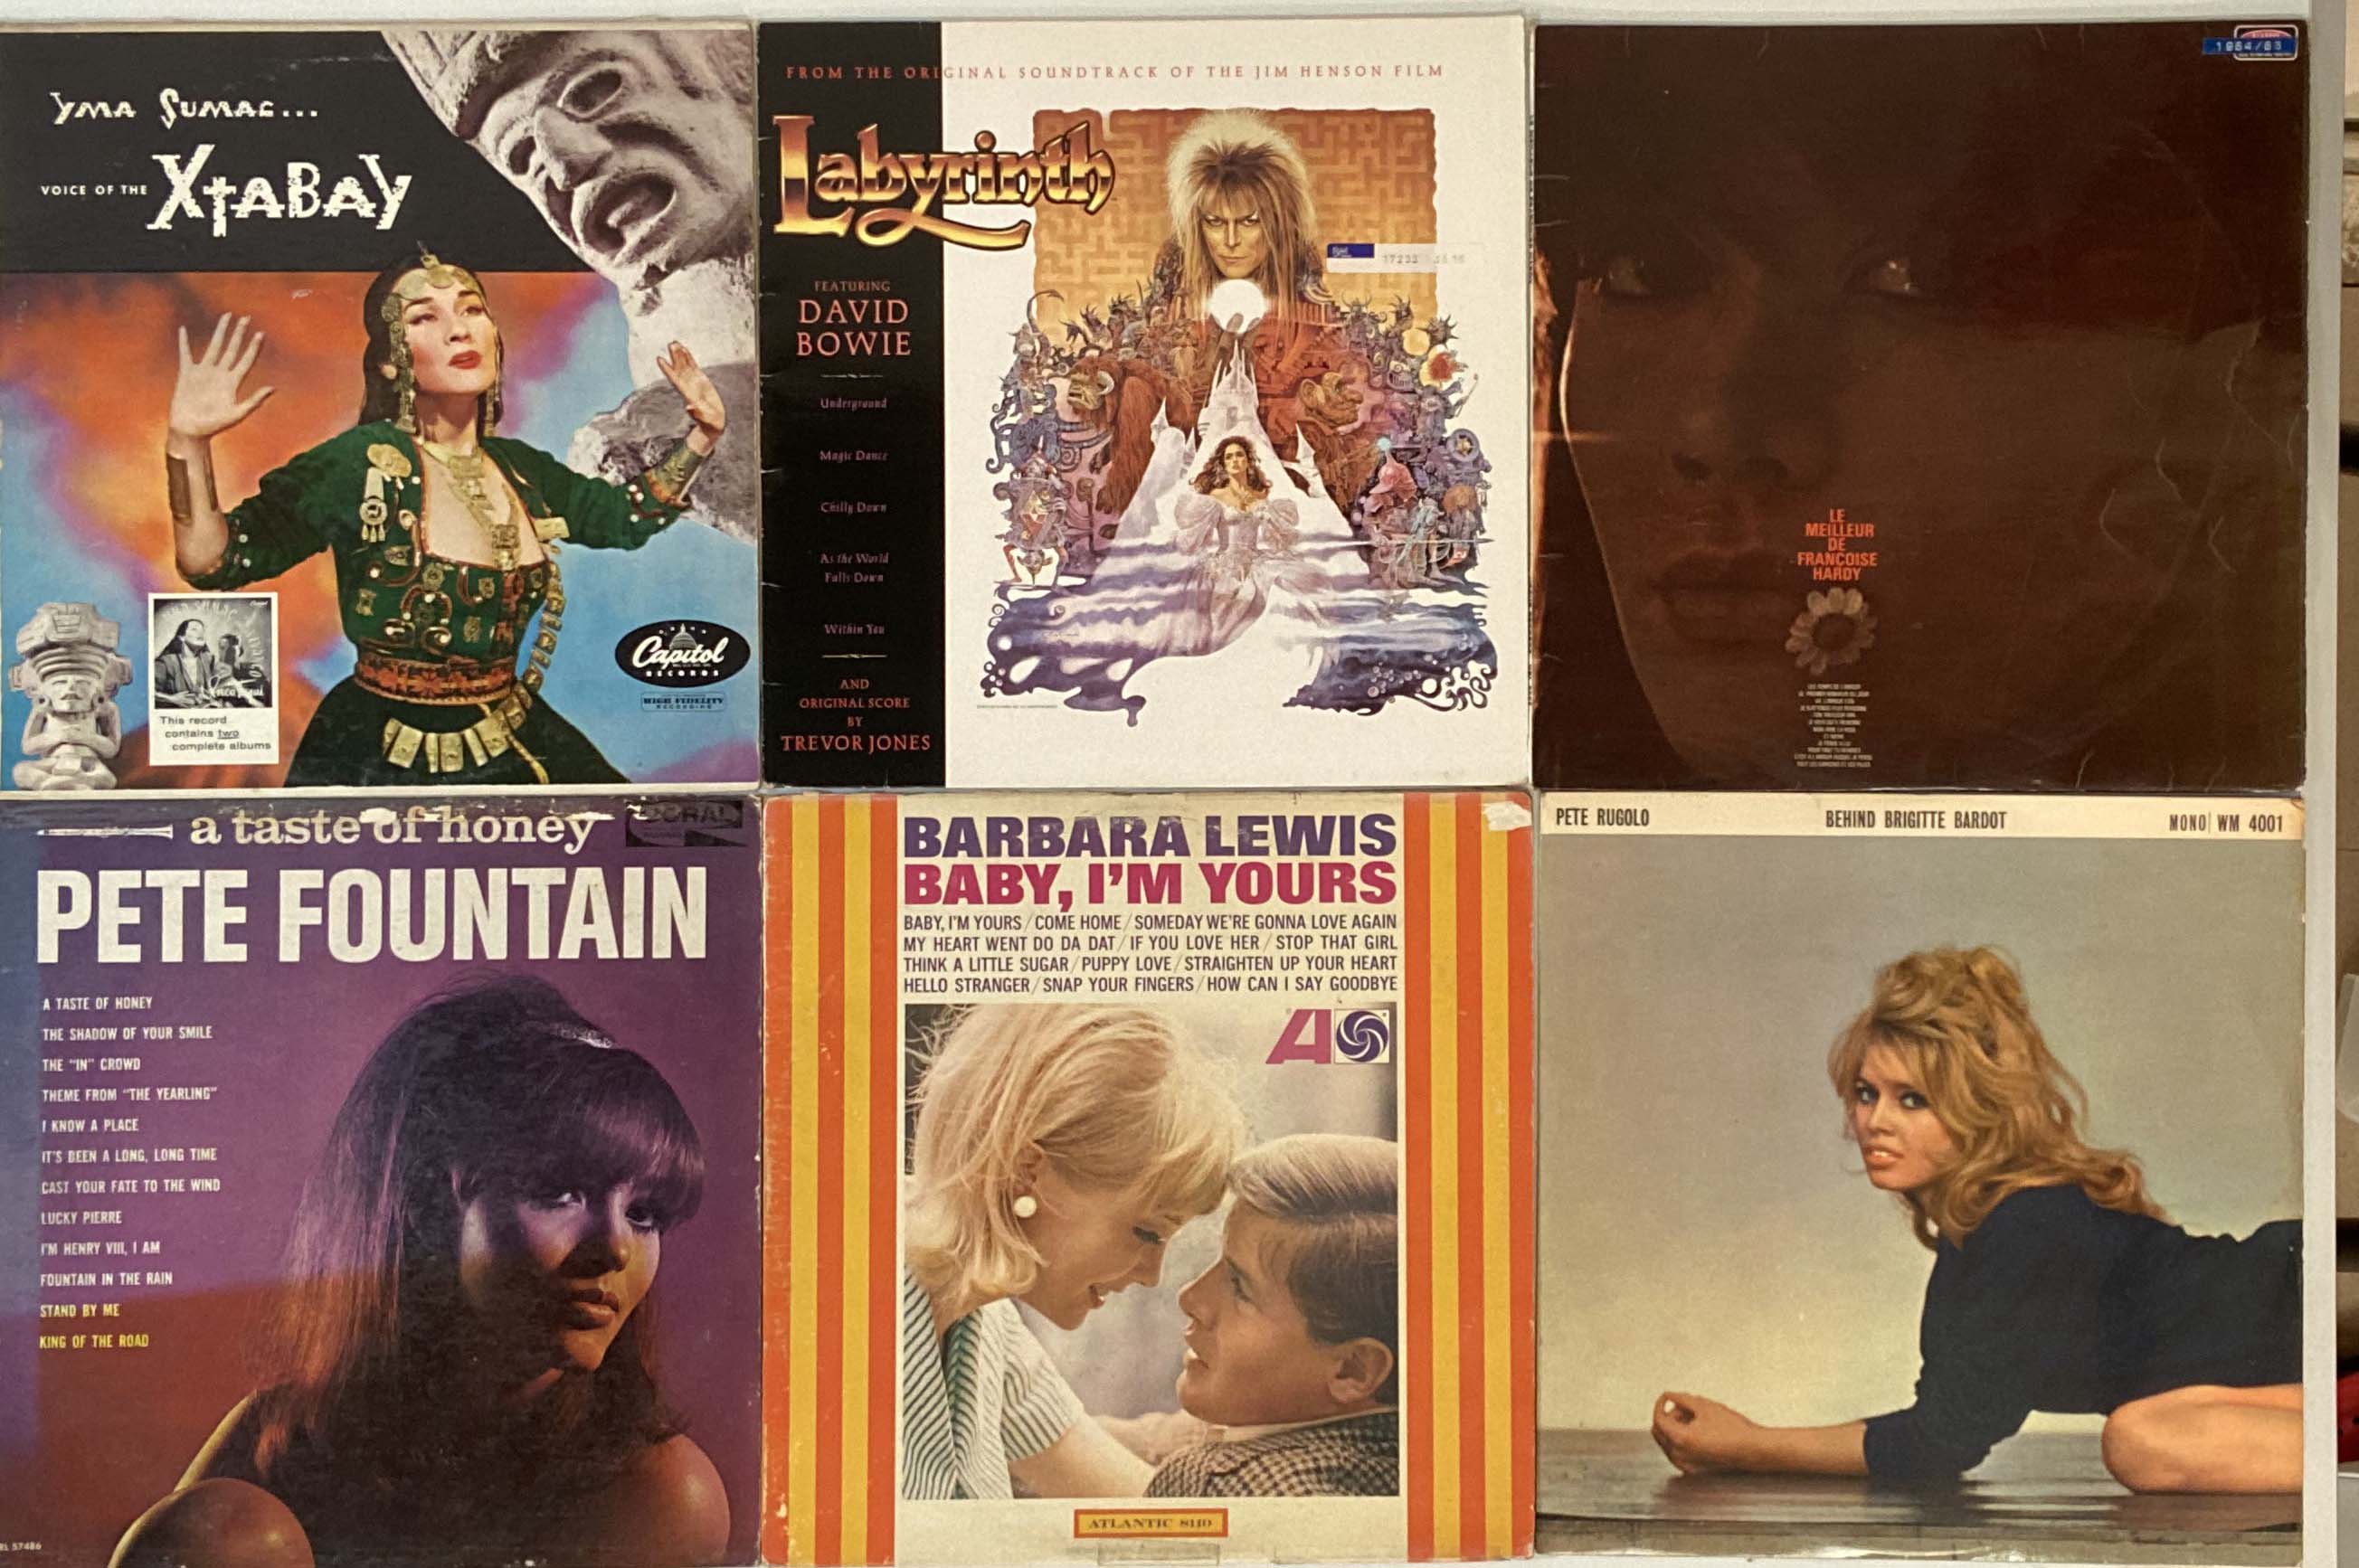 TORCH/SOUNDTRACK/RAT PACK/EXOTICA/COMEDY/COUNTRY/EASY - LPs.